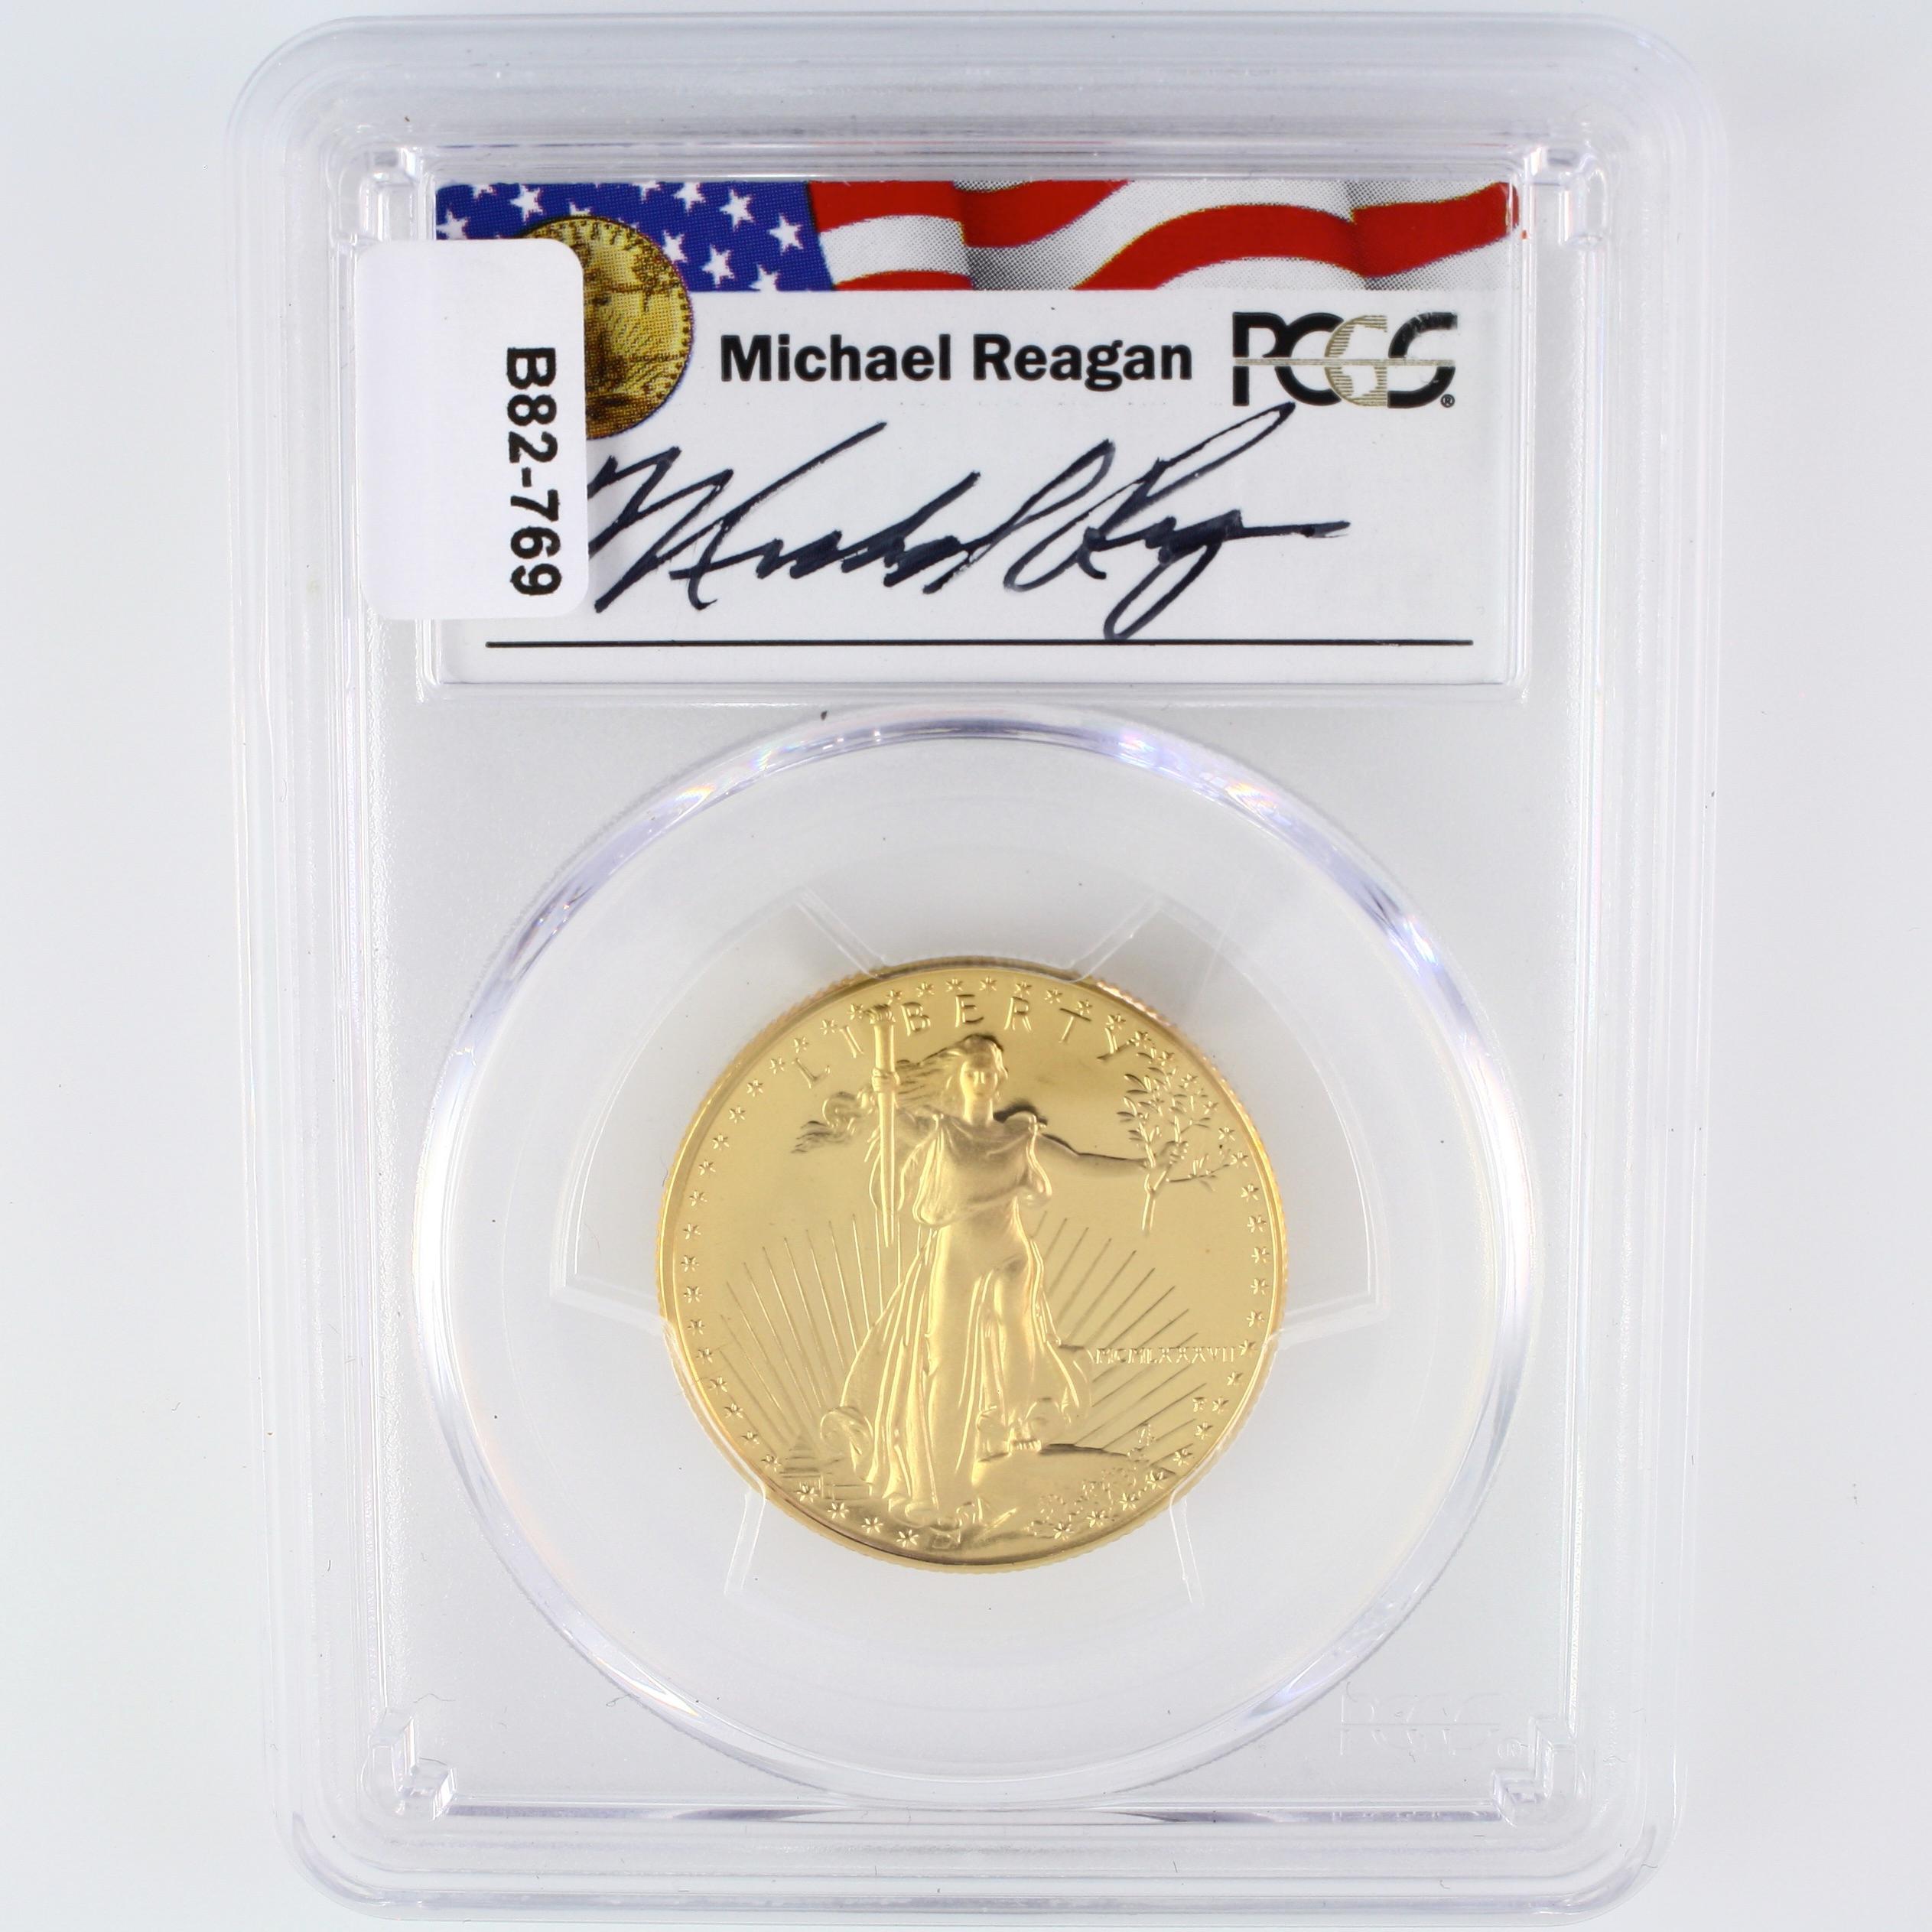 Certified 1987-P U.S. autographed proof 1/2oz $25 American Eagle gold coin